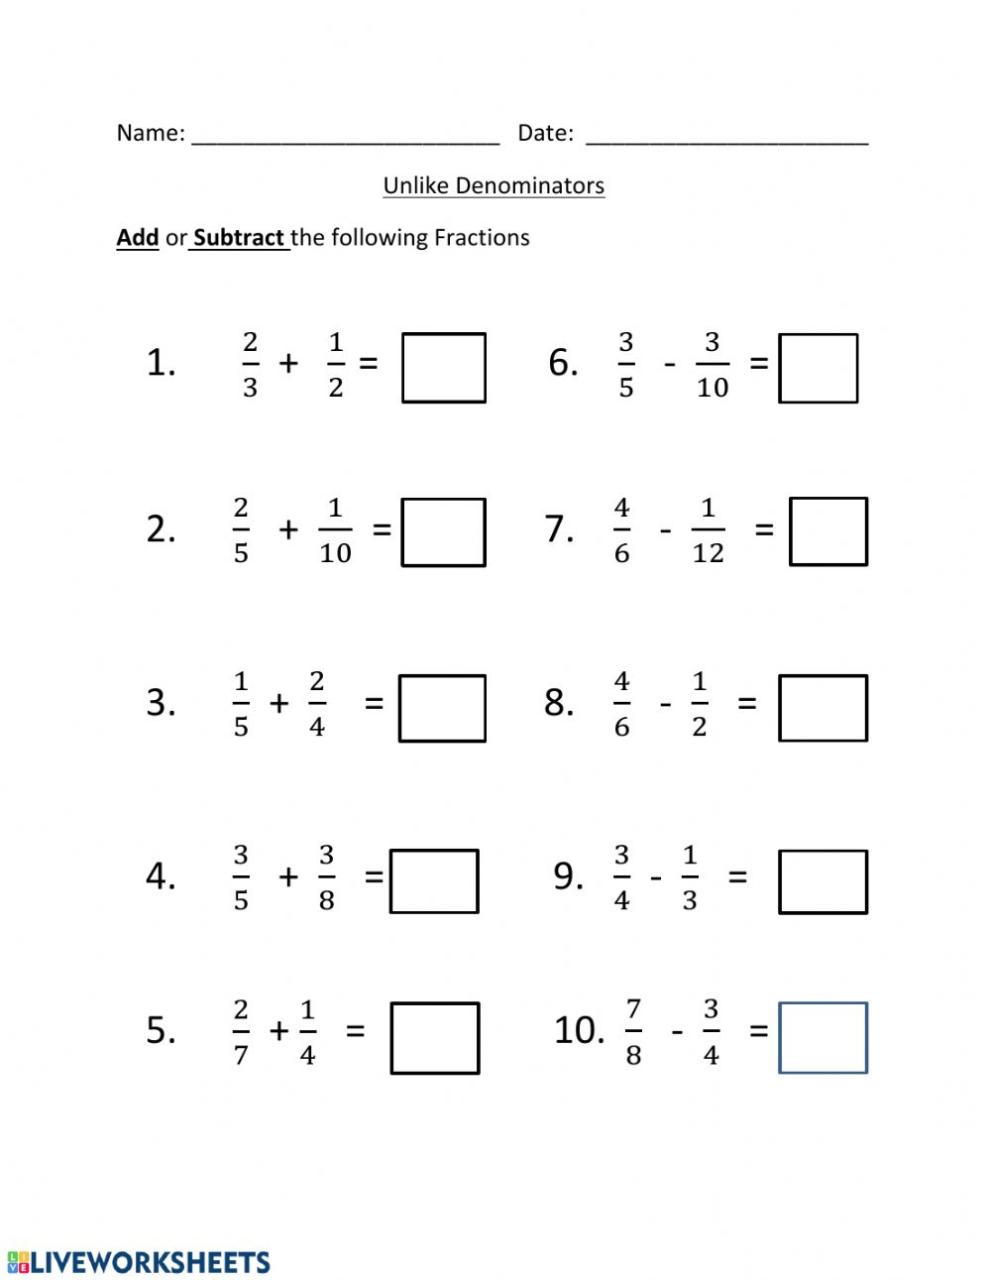 Worksheet Addition And Subtraction Of Fractions